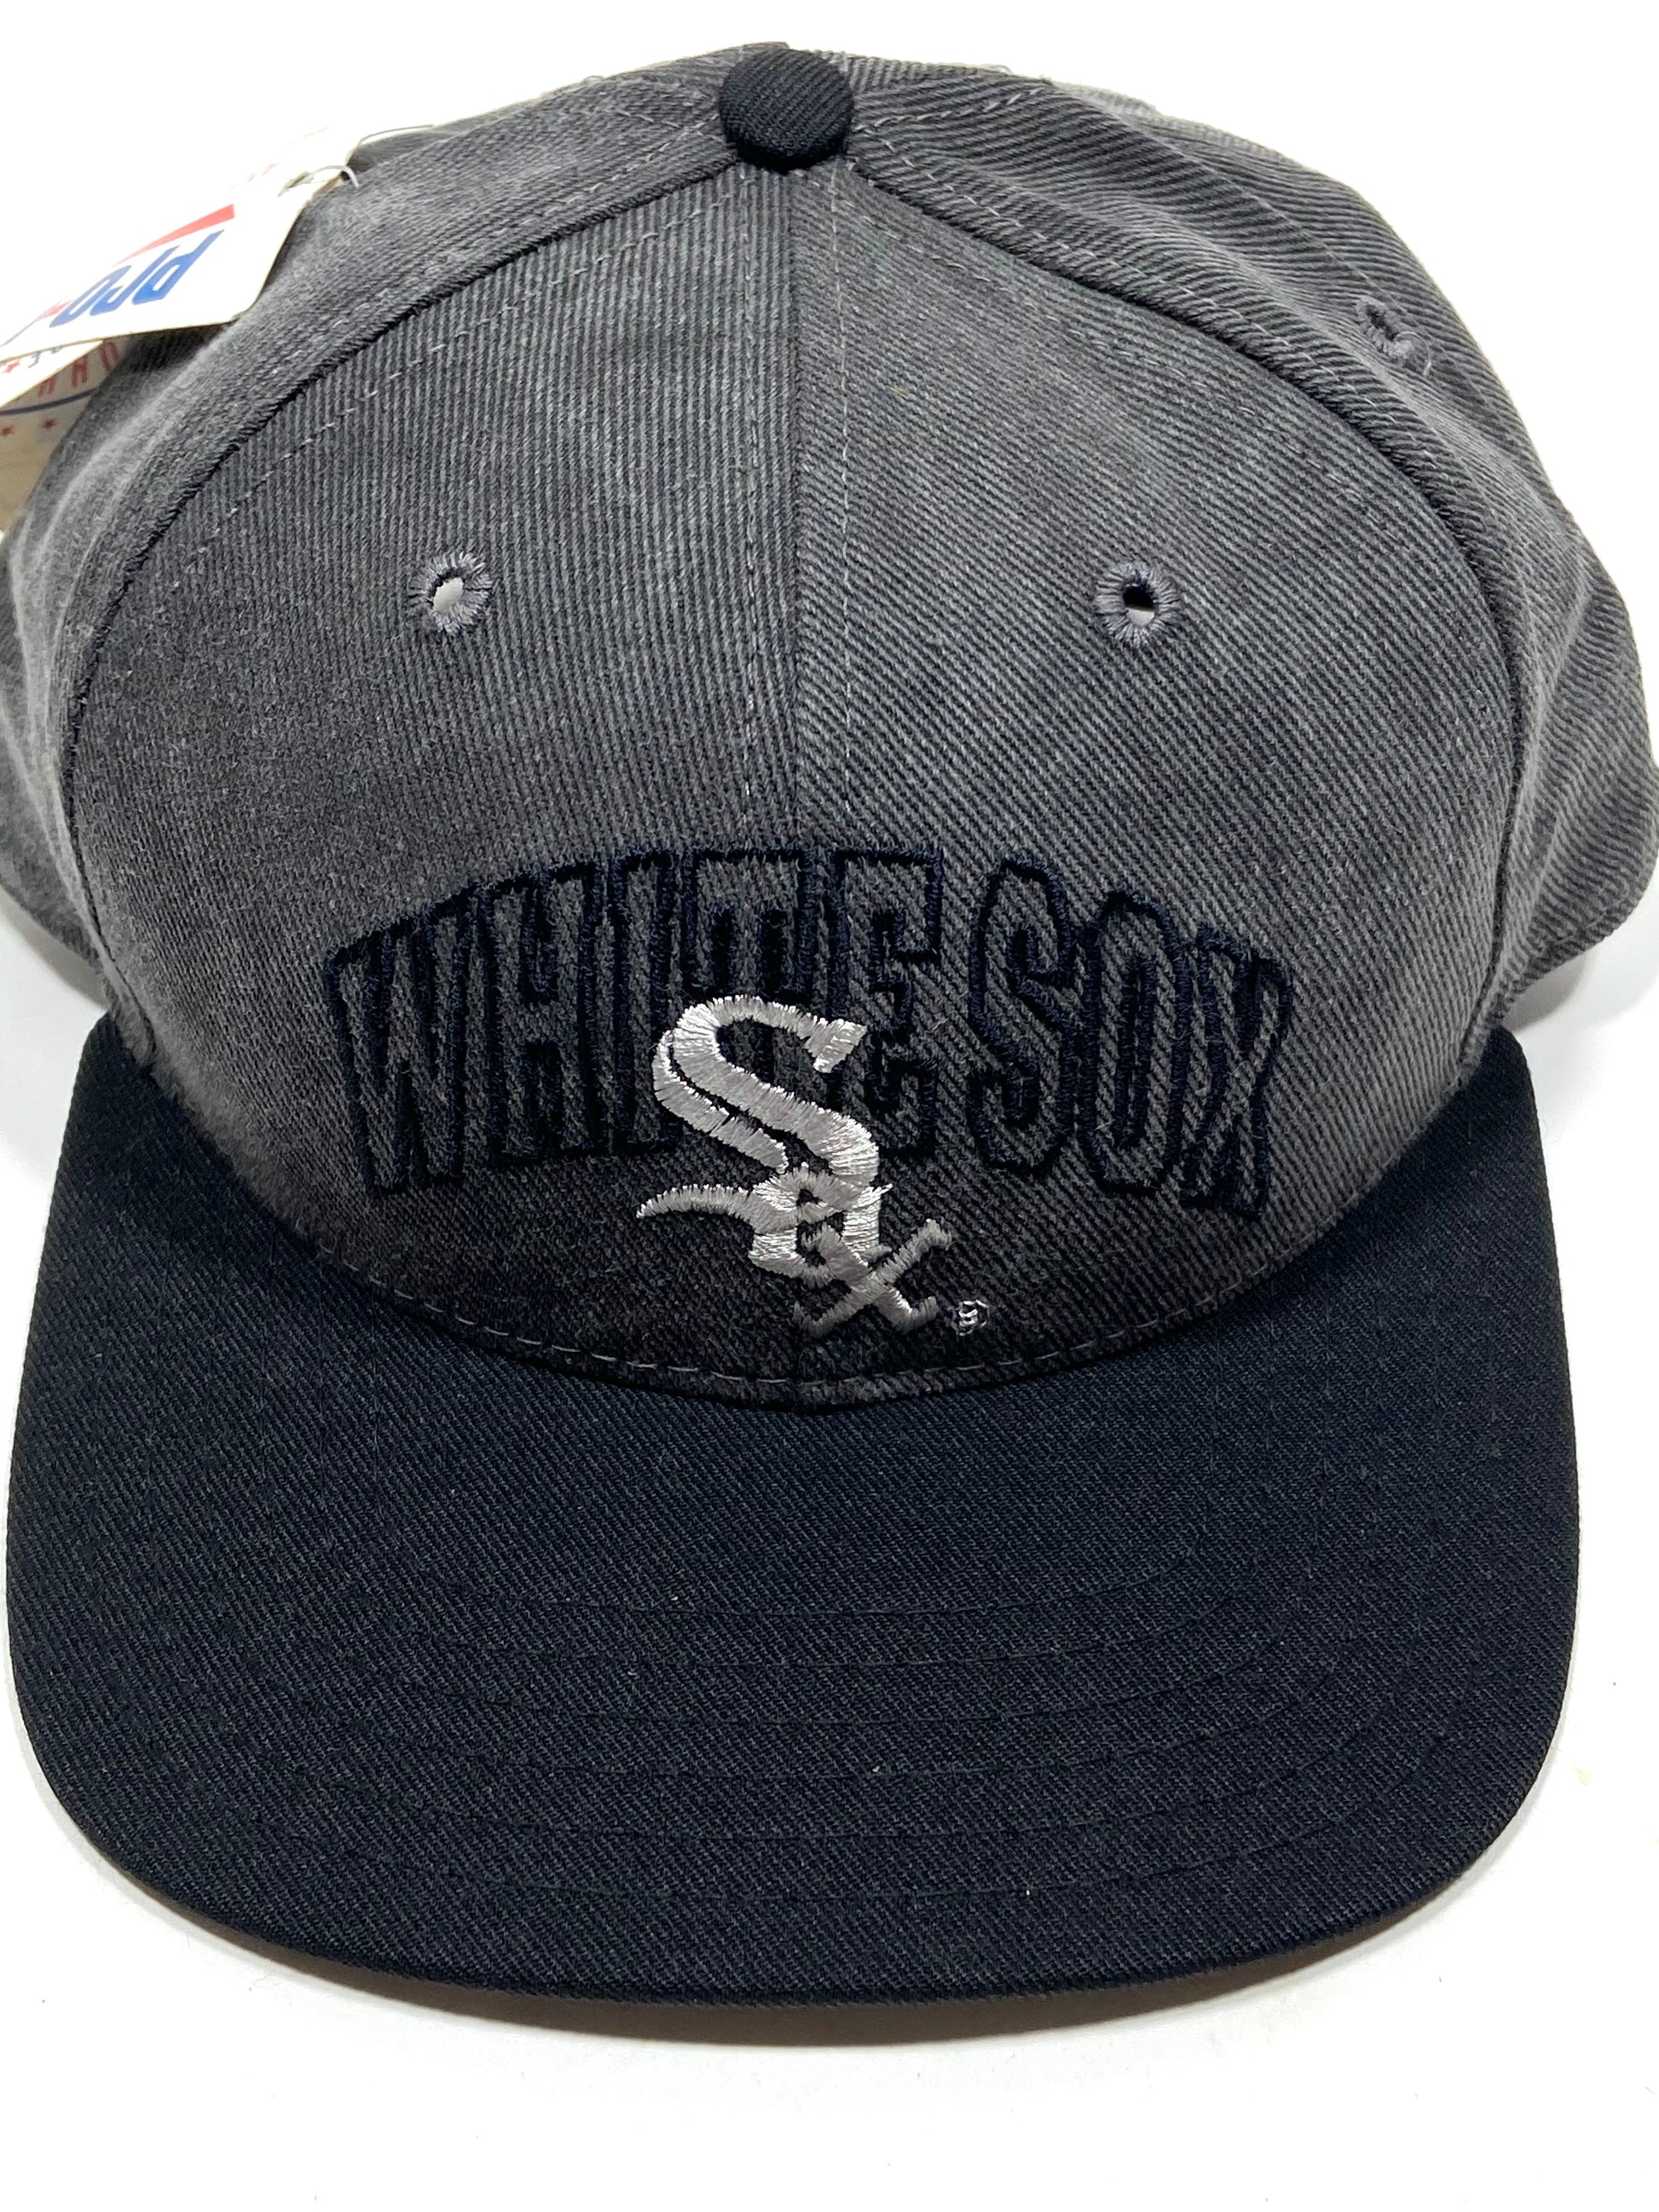 Chicago White Sox Vintage MLB Gray Sox Snapback by Pro-Line